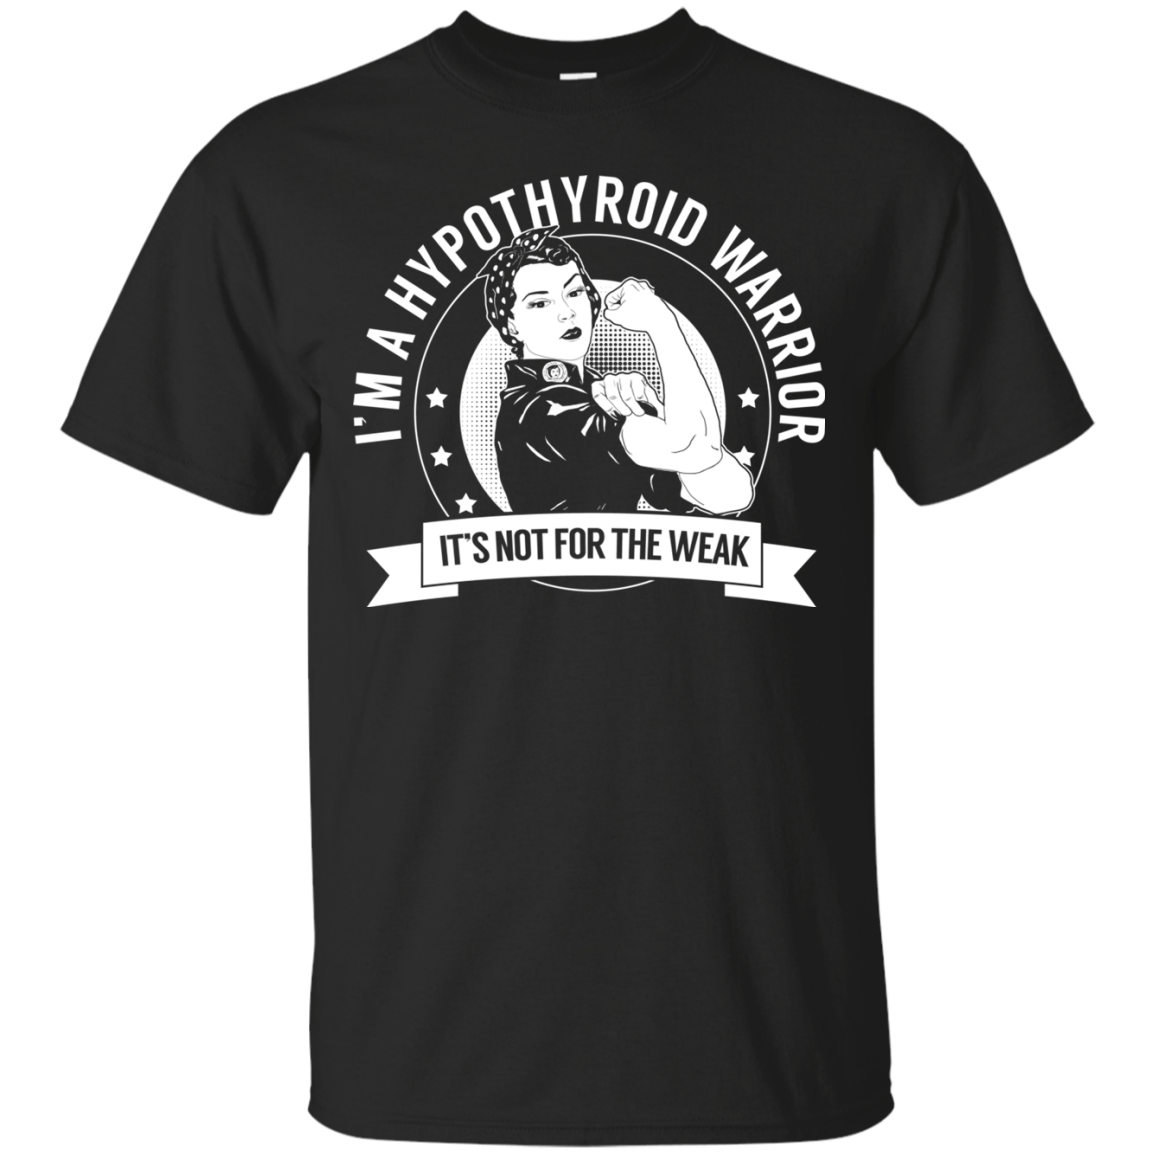 Hypothyroid Warrior Not For The Weak Cotton T-Shirt - The Unchargeables